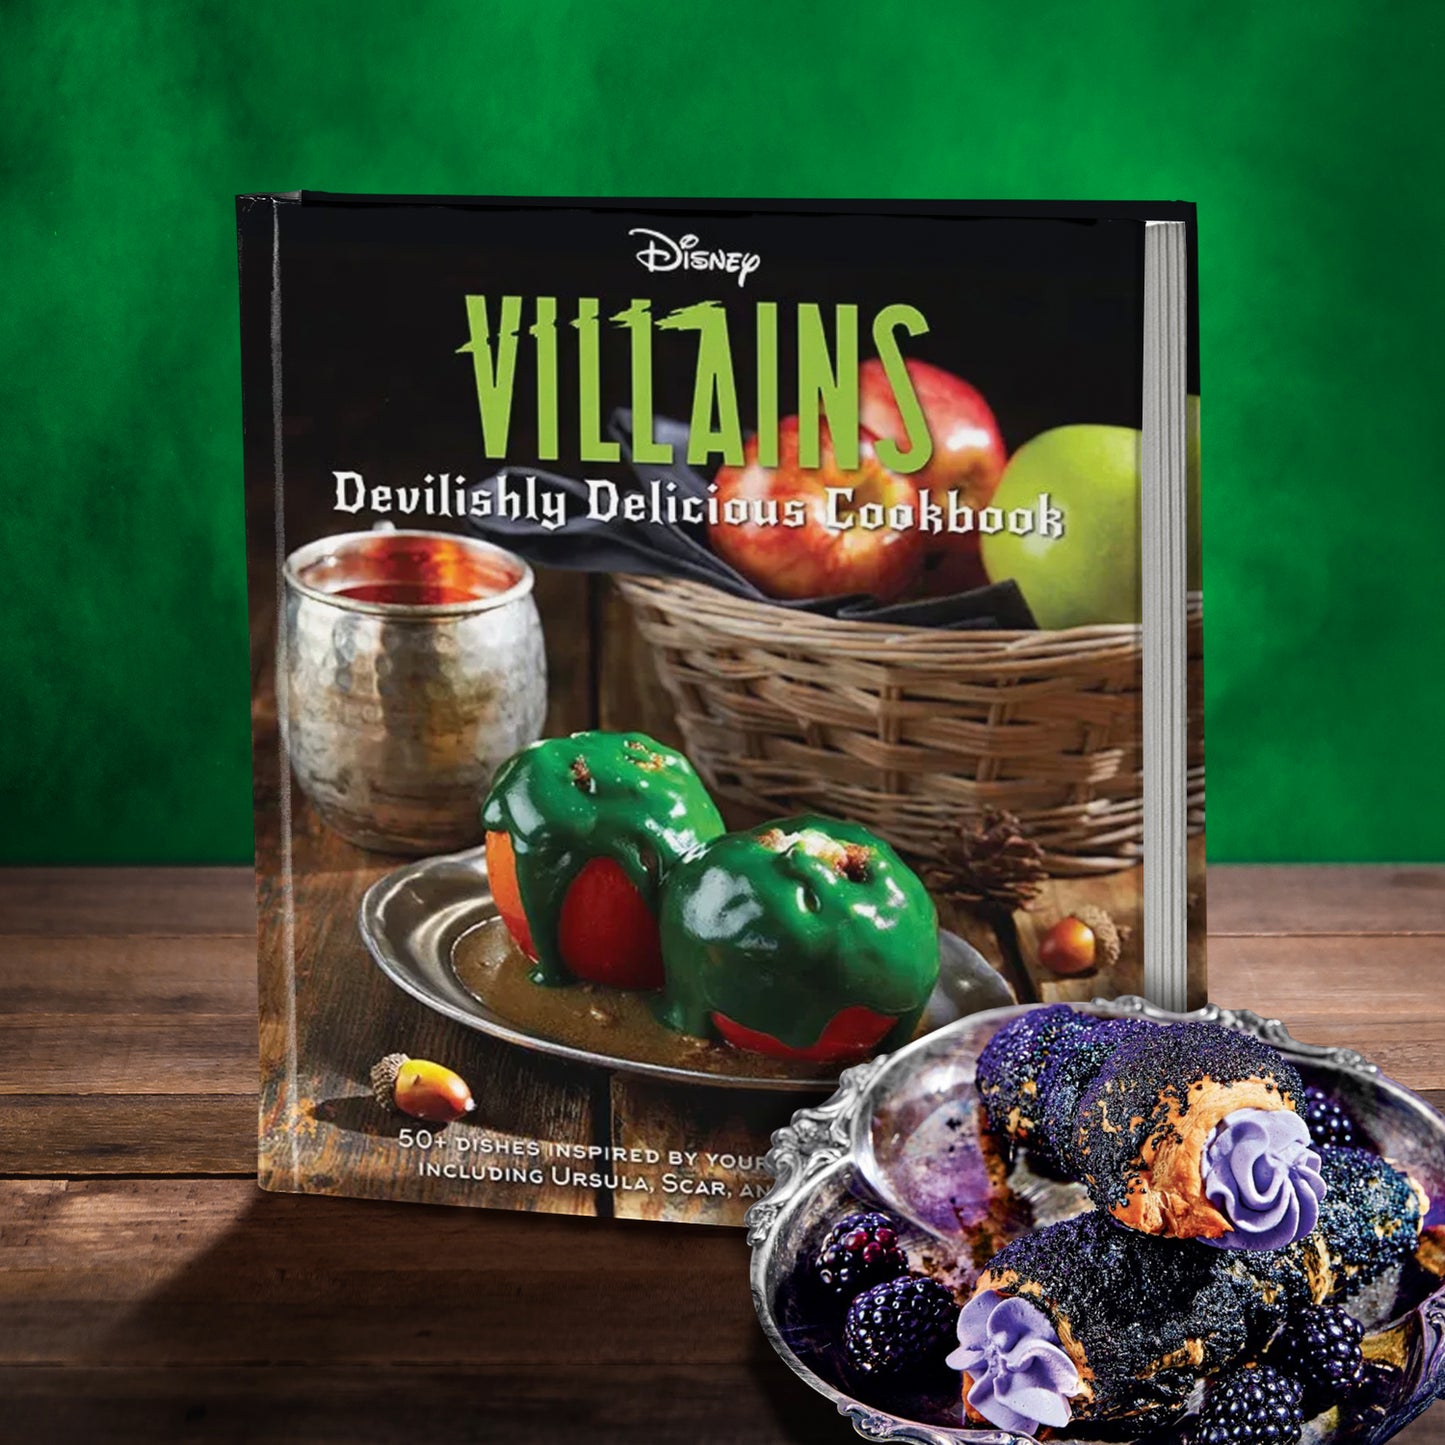 A book on a wood table, in front of a green background. On the book cover is white and green text saying "disney villains, devilishly delocious cookbook." Below the text are apples covered in green ooze, on a metal plate. Behind them is a basket filled with fresh apples. Next to the basket is a metal mug. At the bottom is white text saying "50 plus dishes inspired by your favorite villains, including ursuala, scar, and cruella de vil." Beside the book is a shell filled with flowers and dark berries.